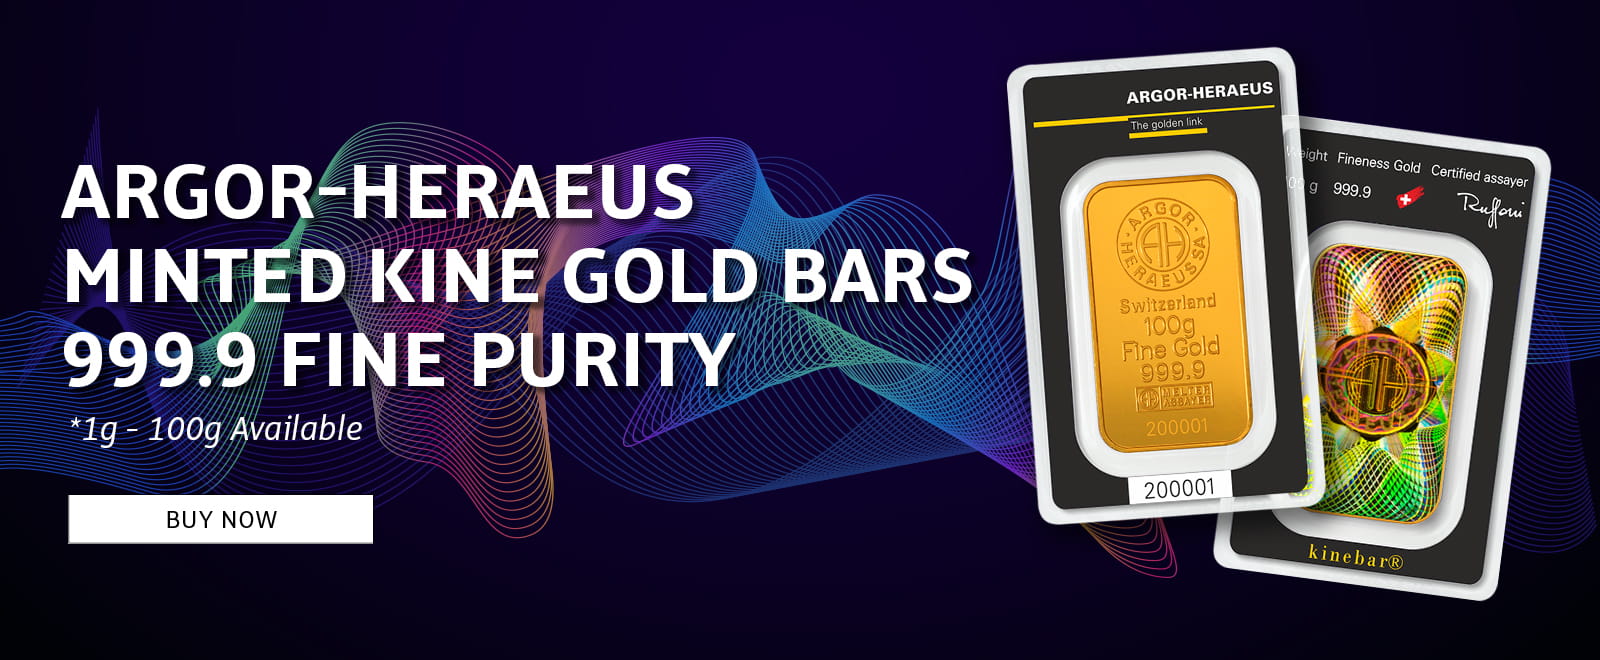 Argor-Heraeus Gold Minted Kine bars, available in various formats from 1 gram to 100 grams